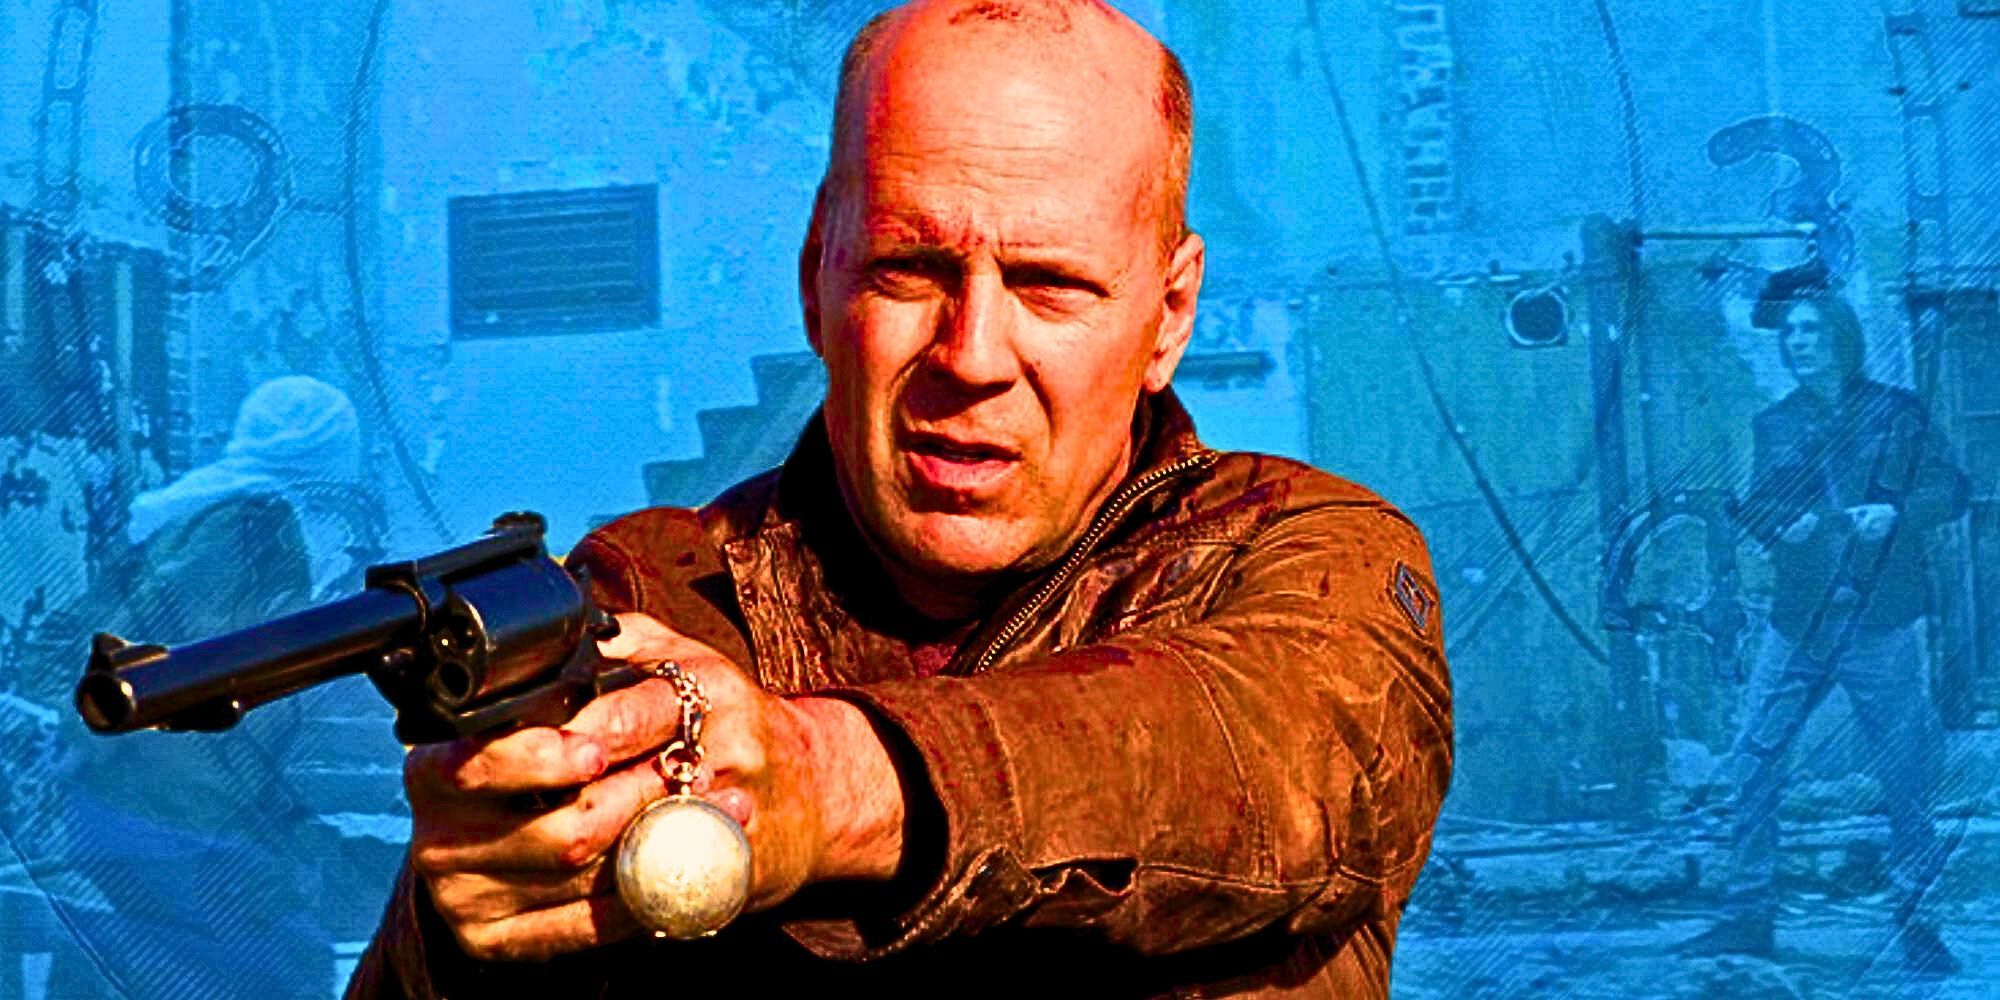 A custom image of Bruce Willis as Old Joe in Looper against a backdrop of other Looper imagery